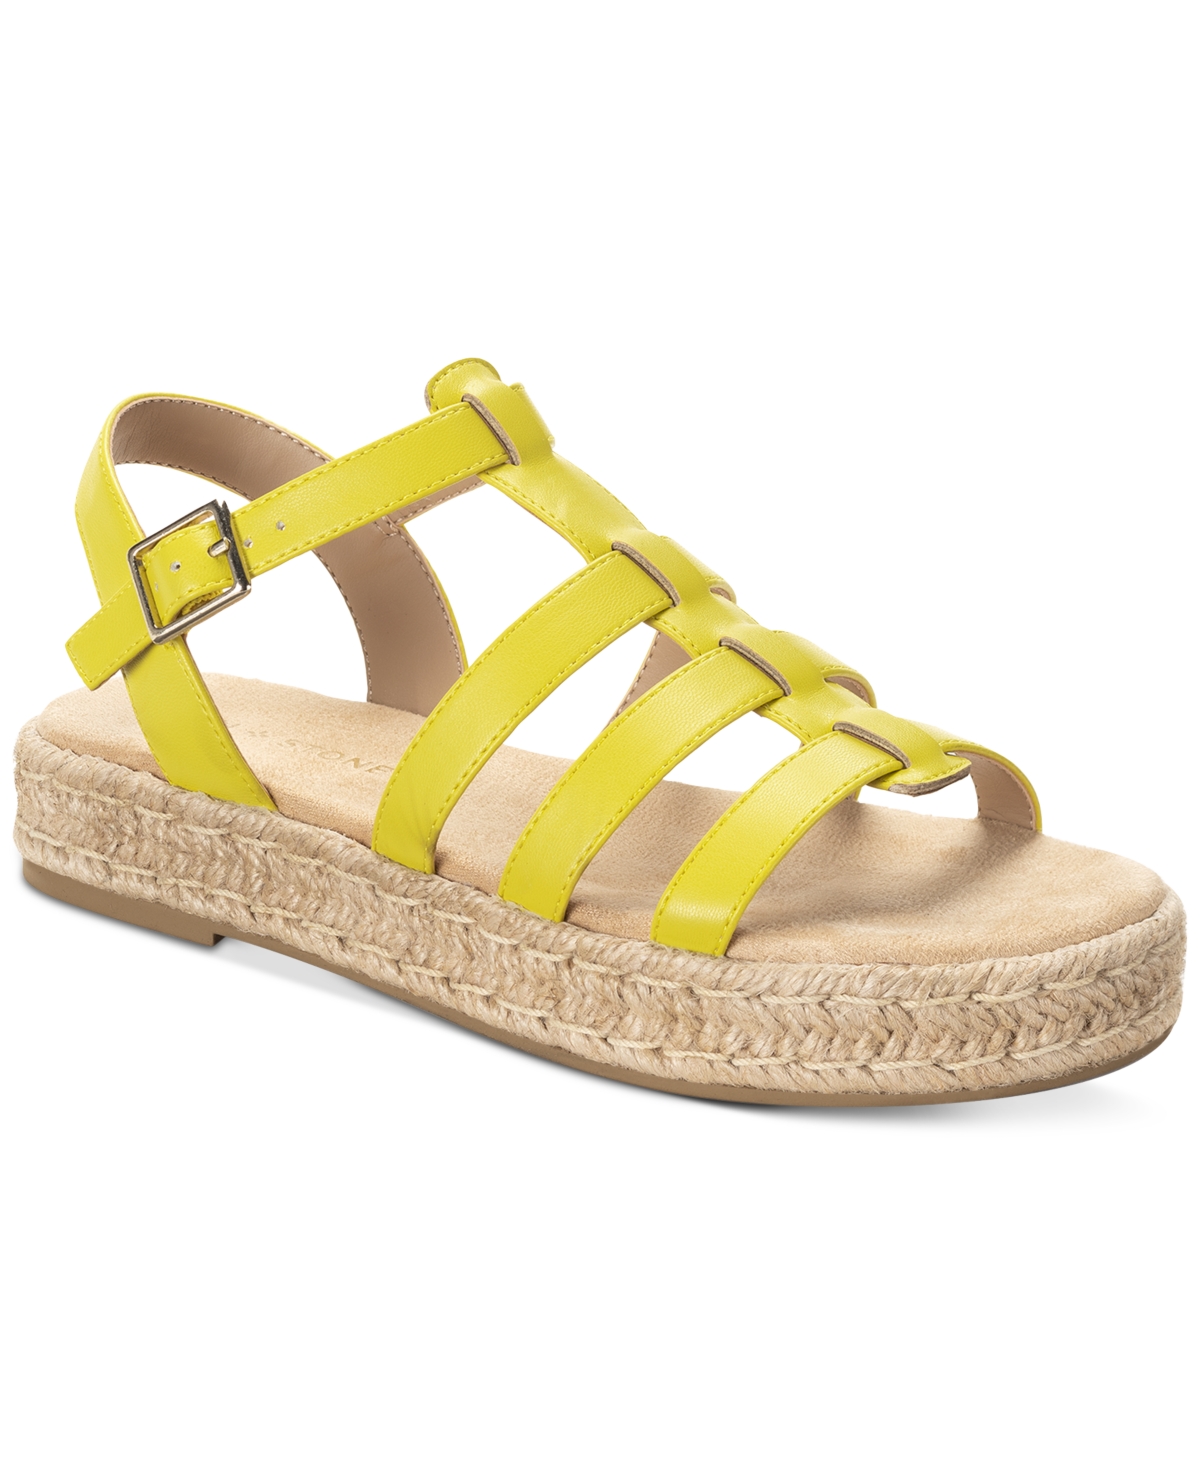 Rykerr Fisherman Espadrille Sandals, Created for Macy's - Citron